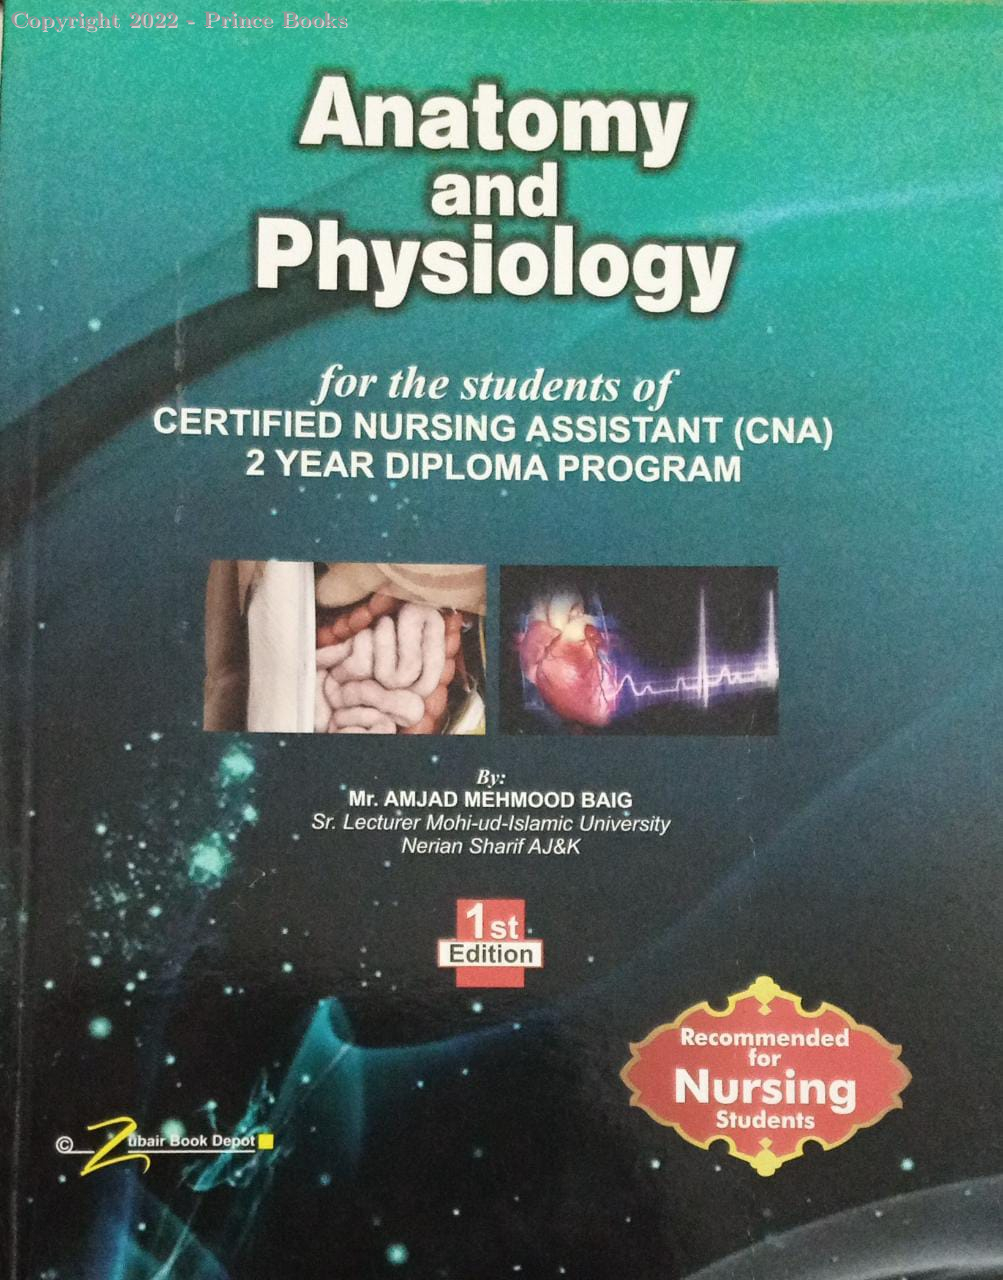 anatomy and physiology for 2 year diploma program, 1st